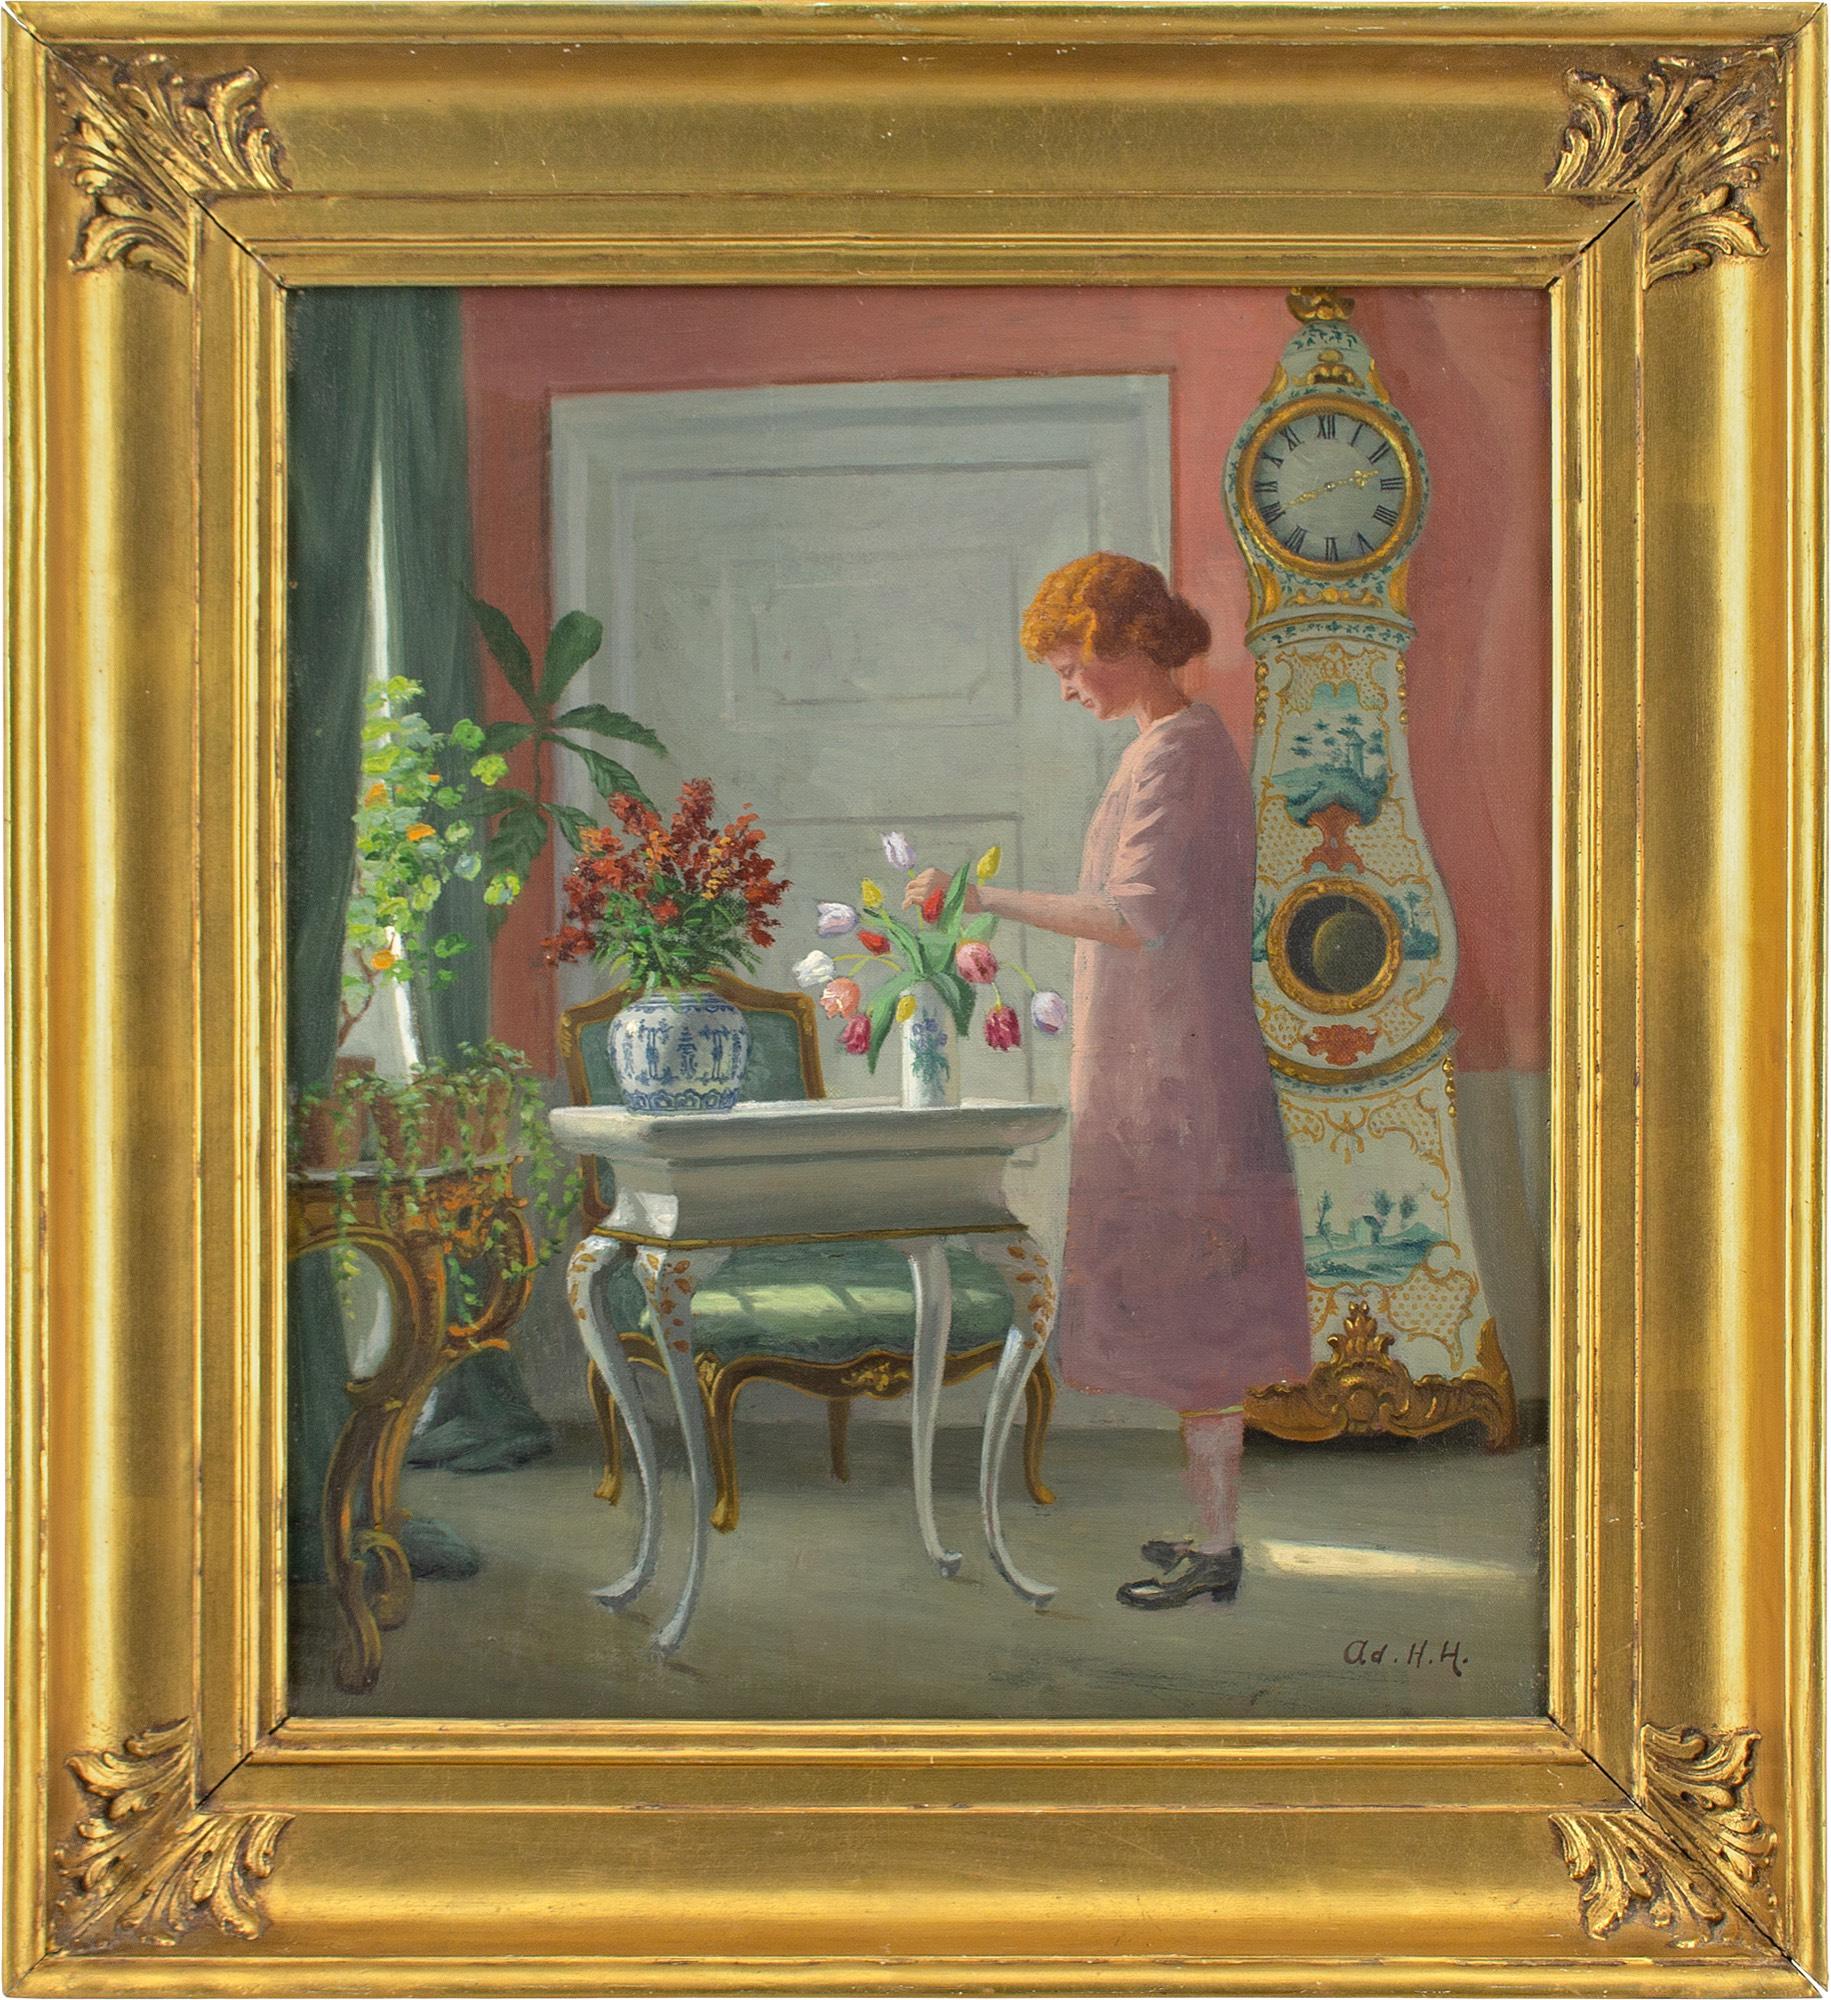 This charming early 20th-century oil painting by Danish artist Adolf Heinrich-Hansen (1859-1925) depicts a beautiful interior with a girl arranging flowers.

The crisp light of a Spring morning cascades through a tall window adorned with flora. The